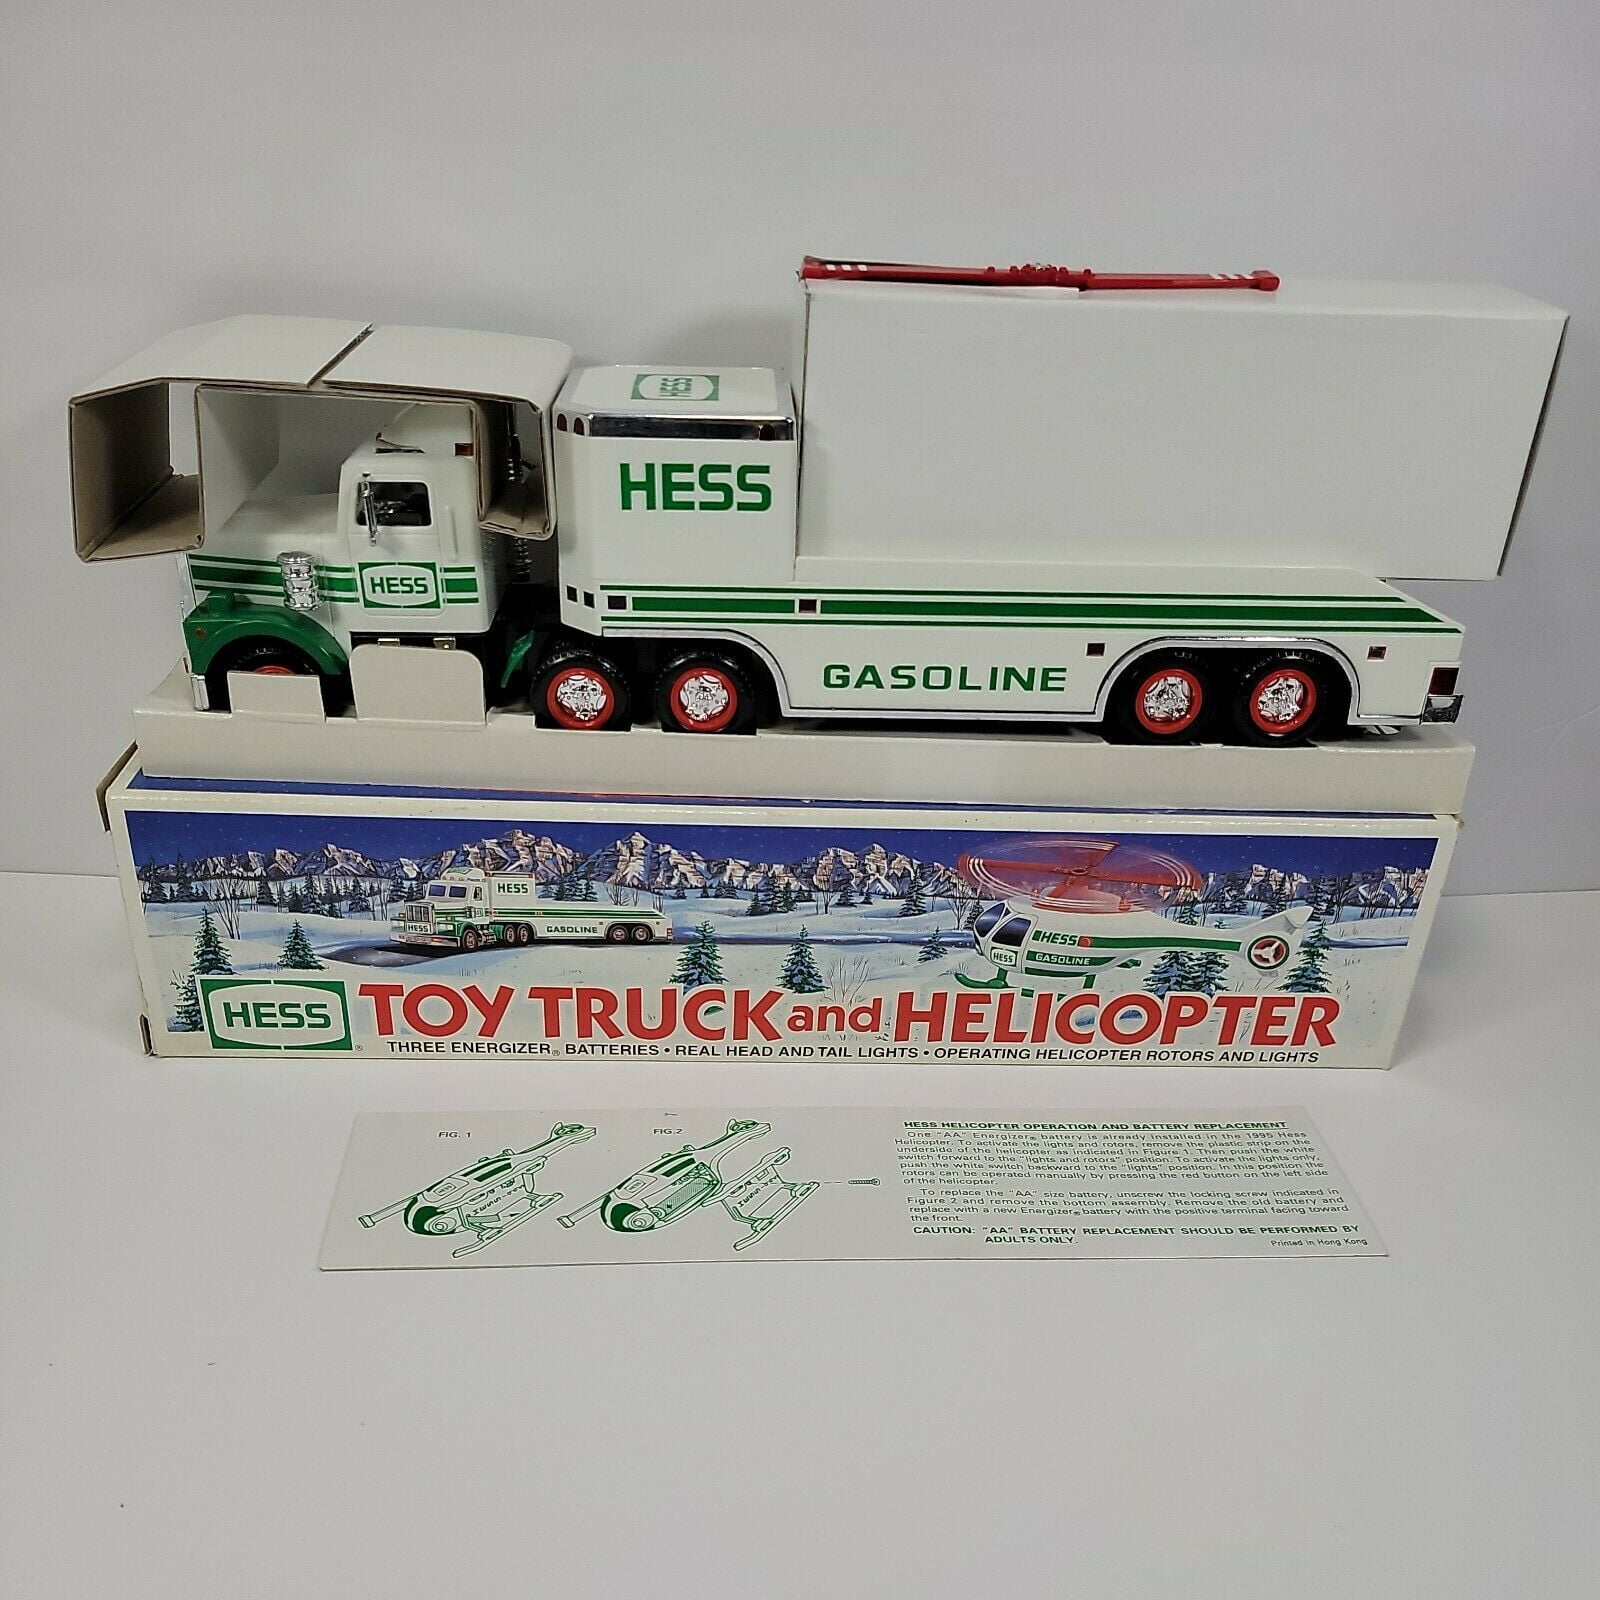 1999 Hess Toy Truck and Space Shuttle with Satellite MINT NEW IN BOX S6078 